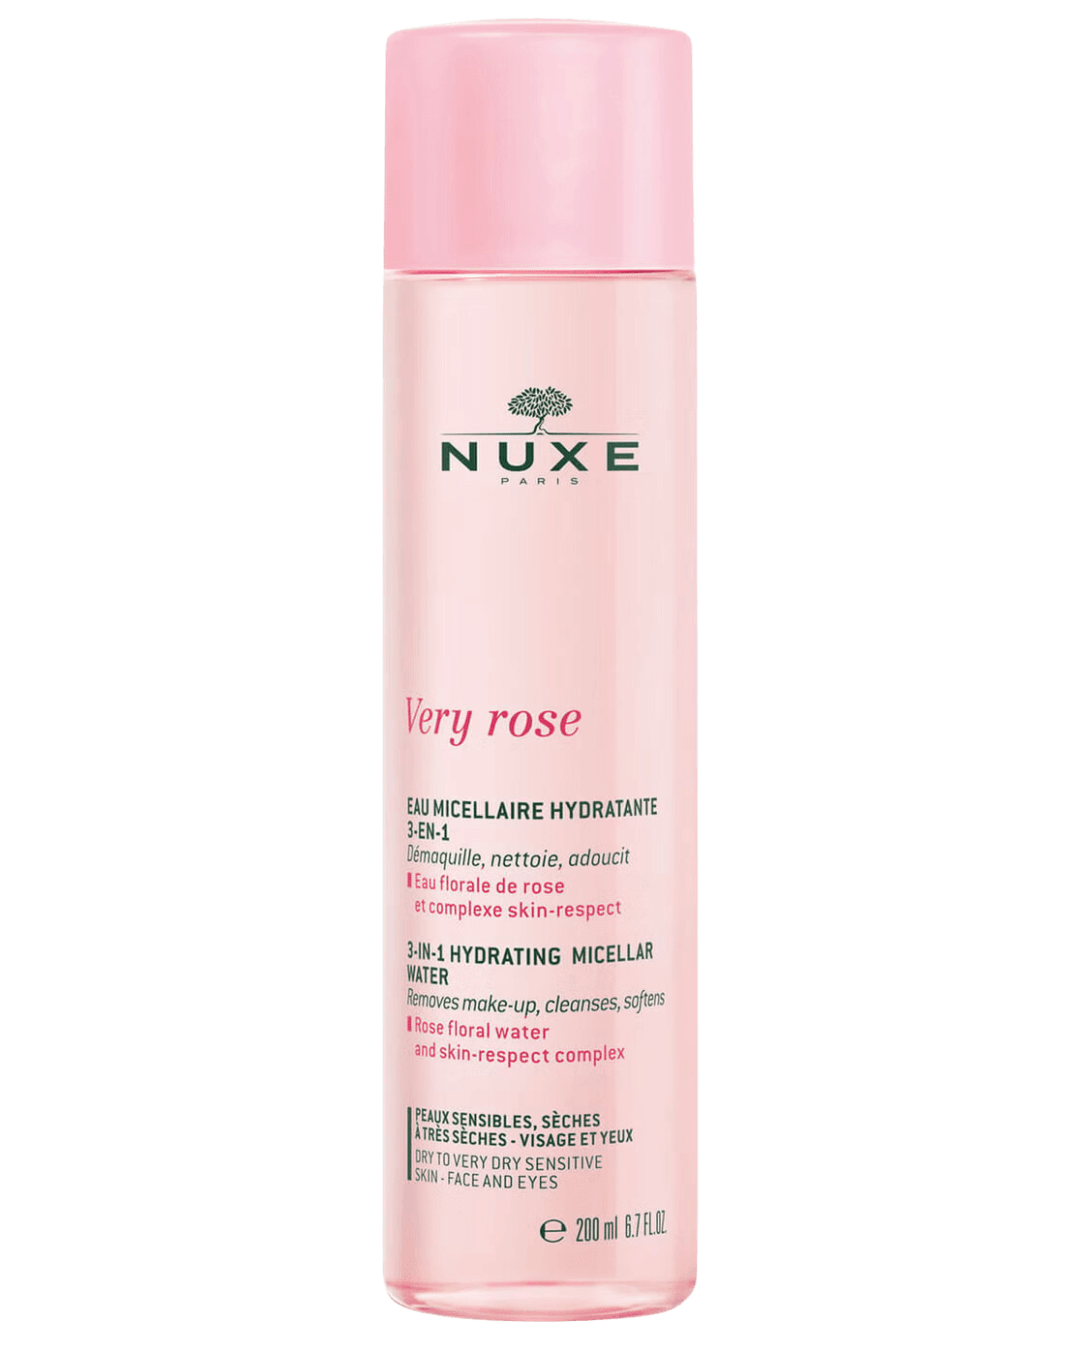 Daily Vanity Beauty Awards 2024 Best Make up Nuxe Very Rose Hydrating 3-In-1 Micellar Water Voted By Beauty Experts